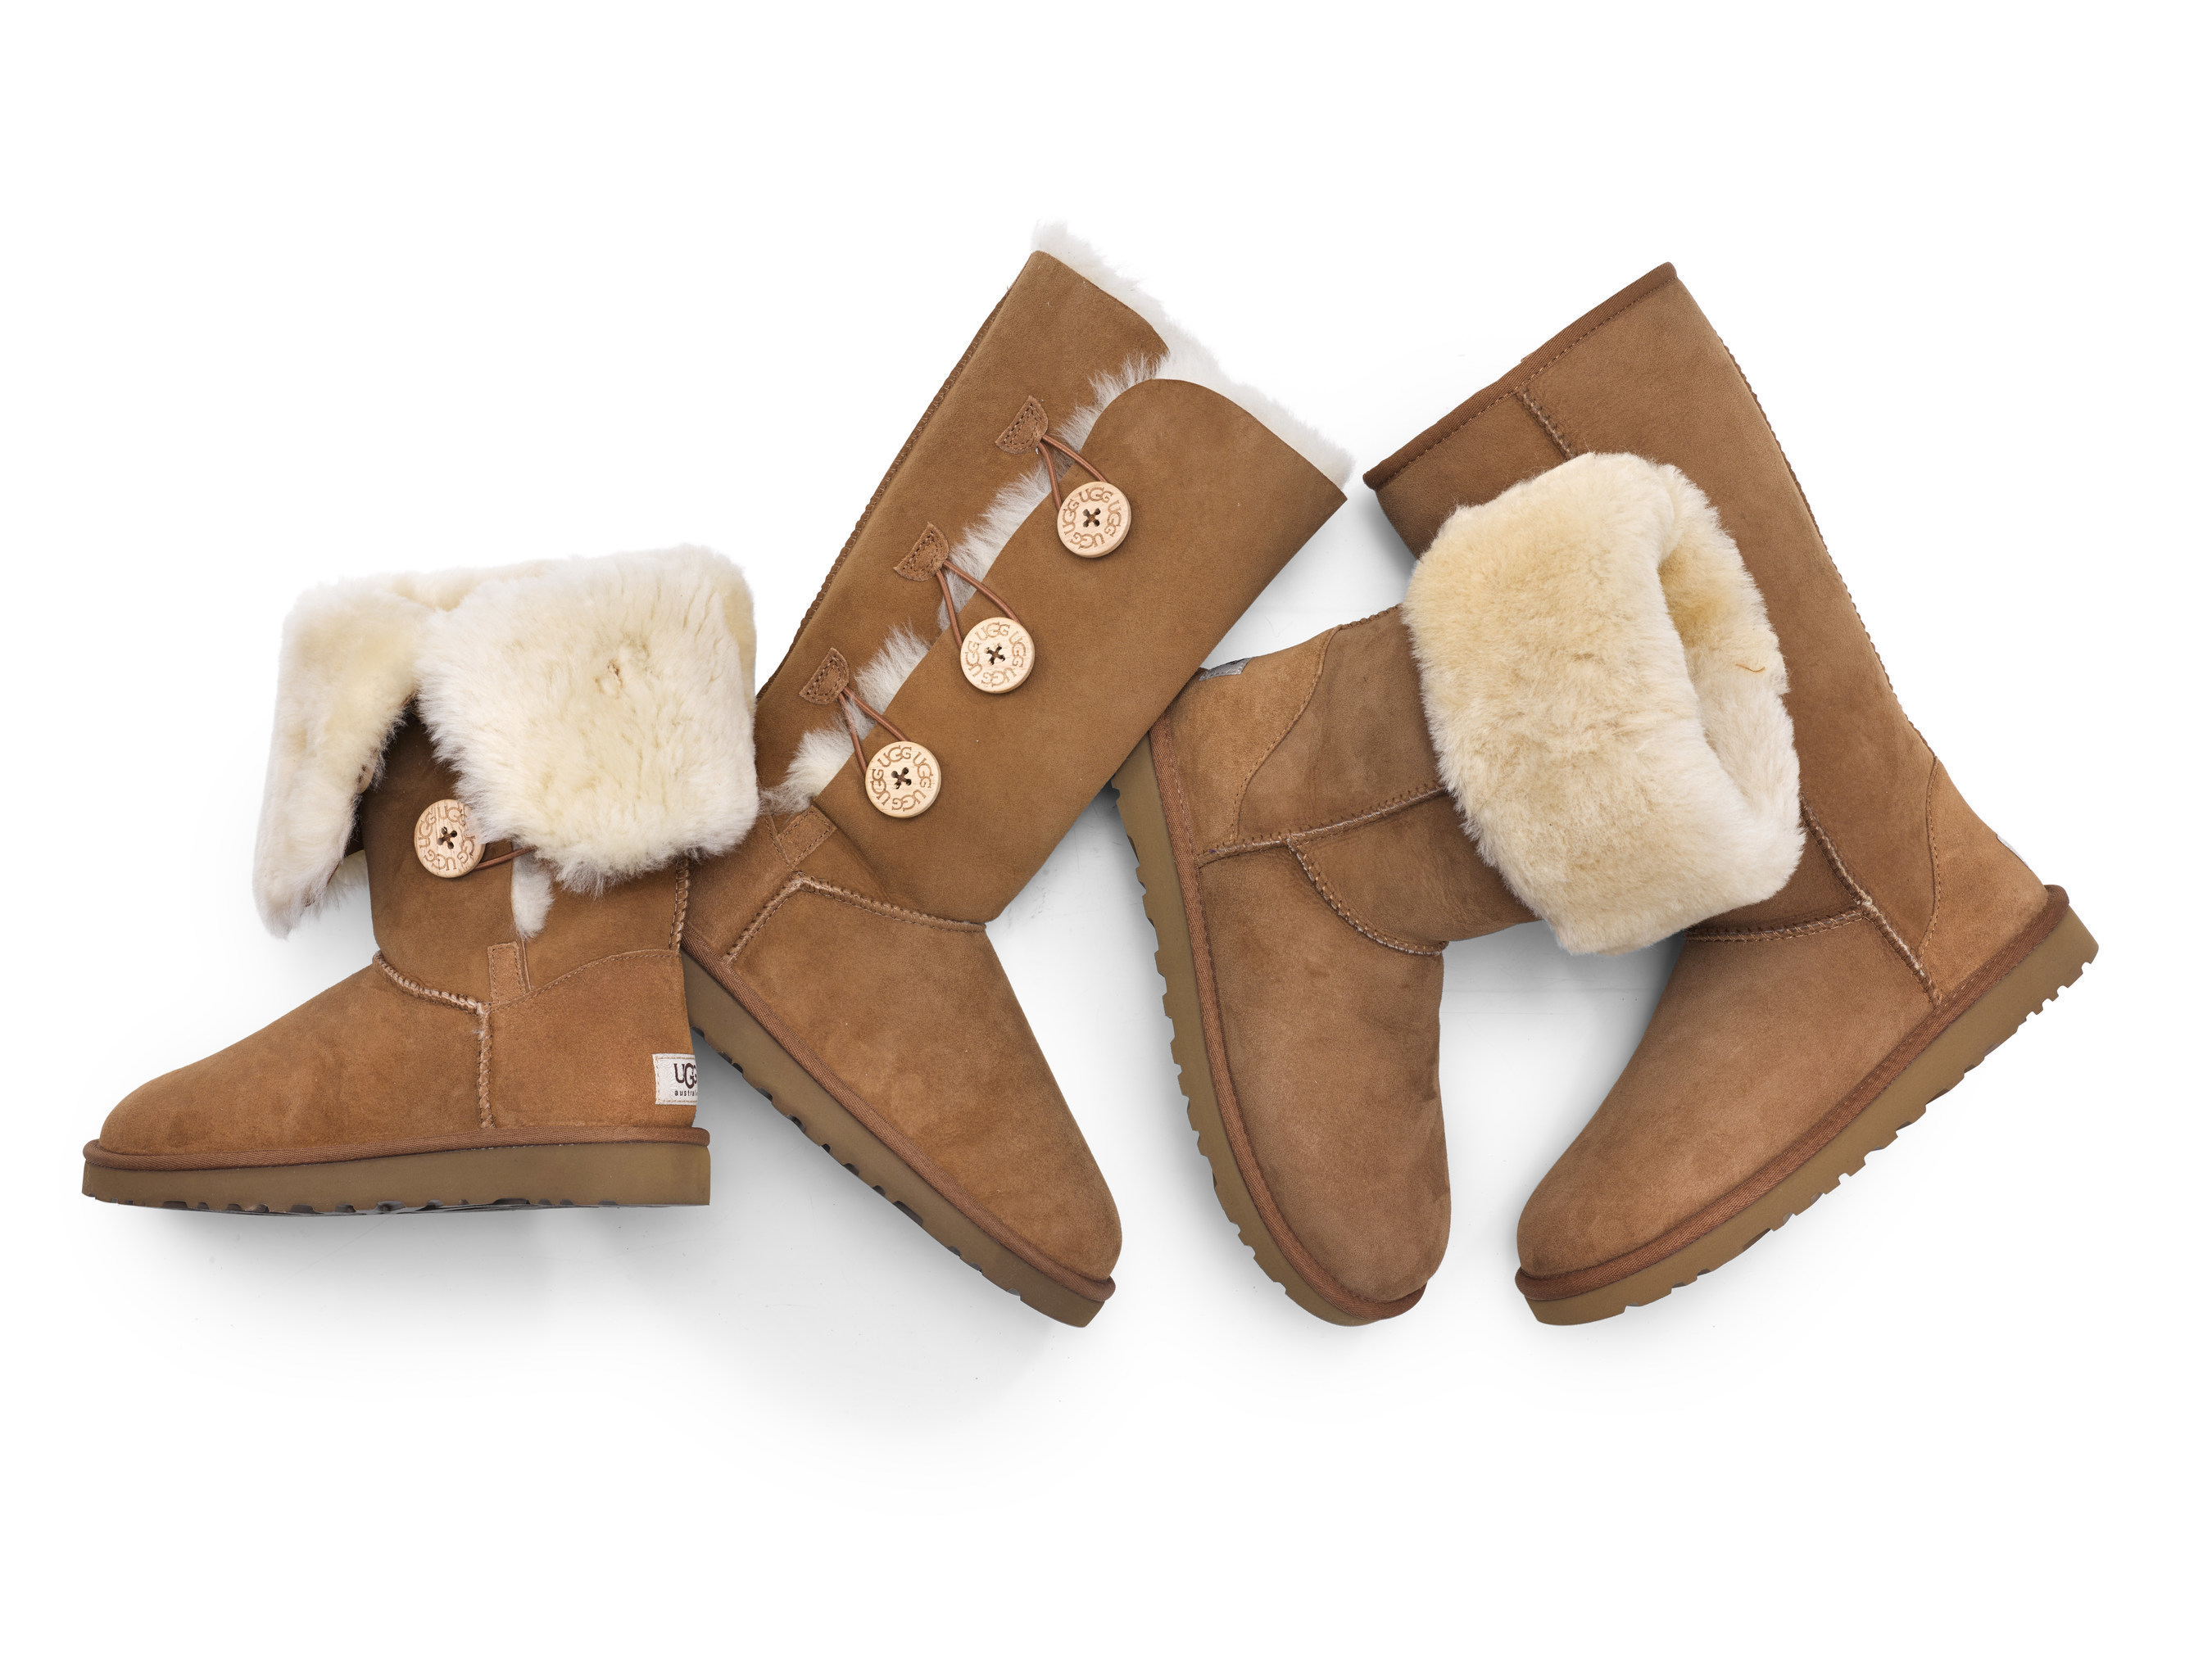 UGG pays homage to its signature color; Chestnut